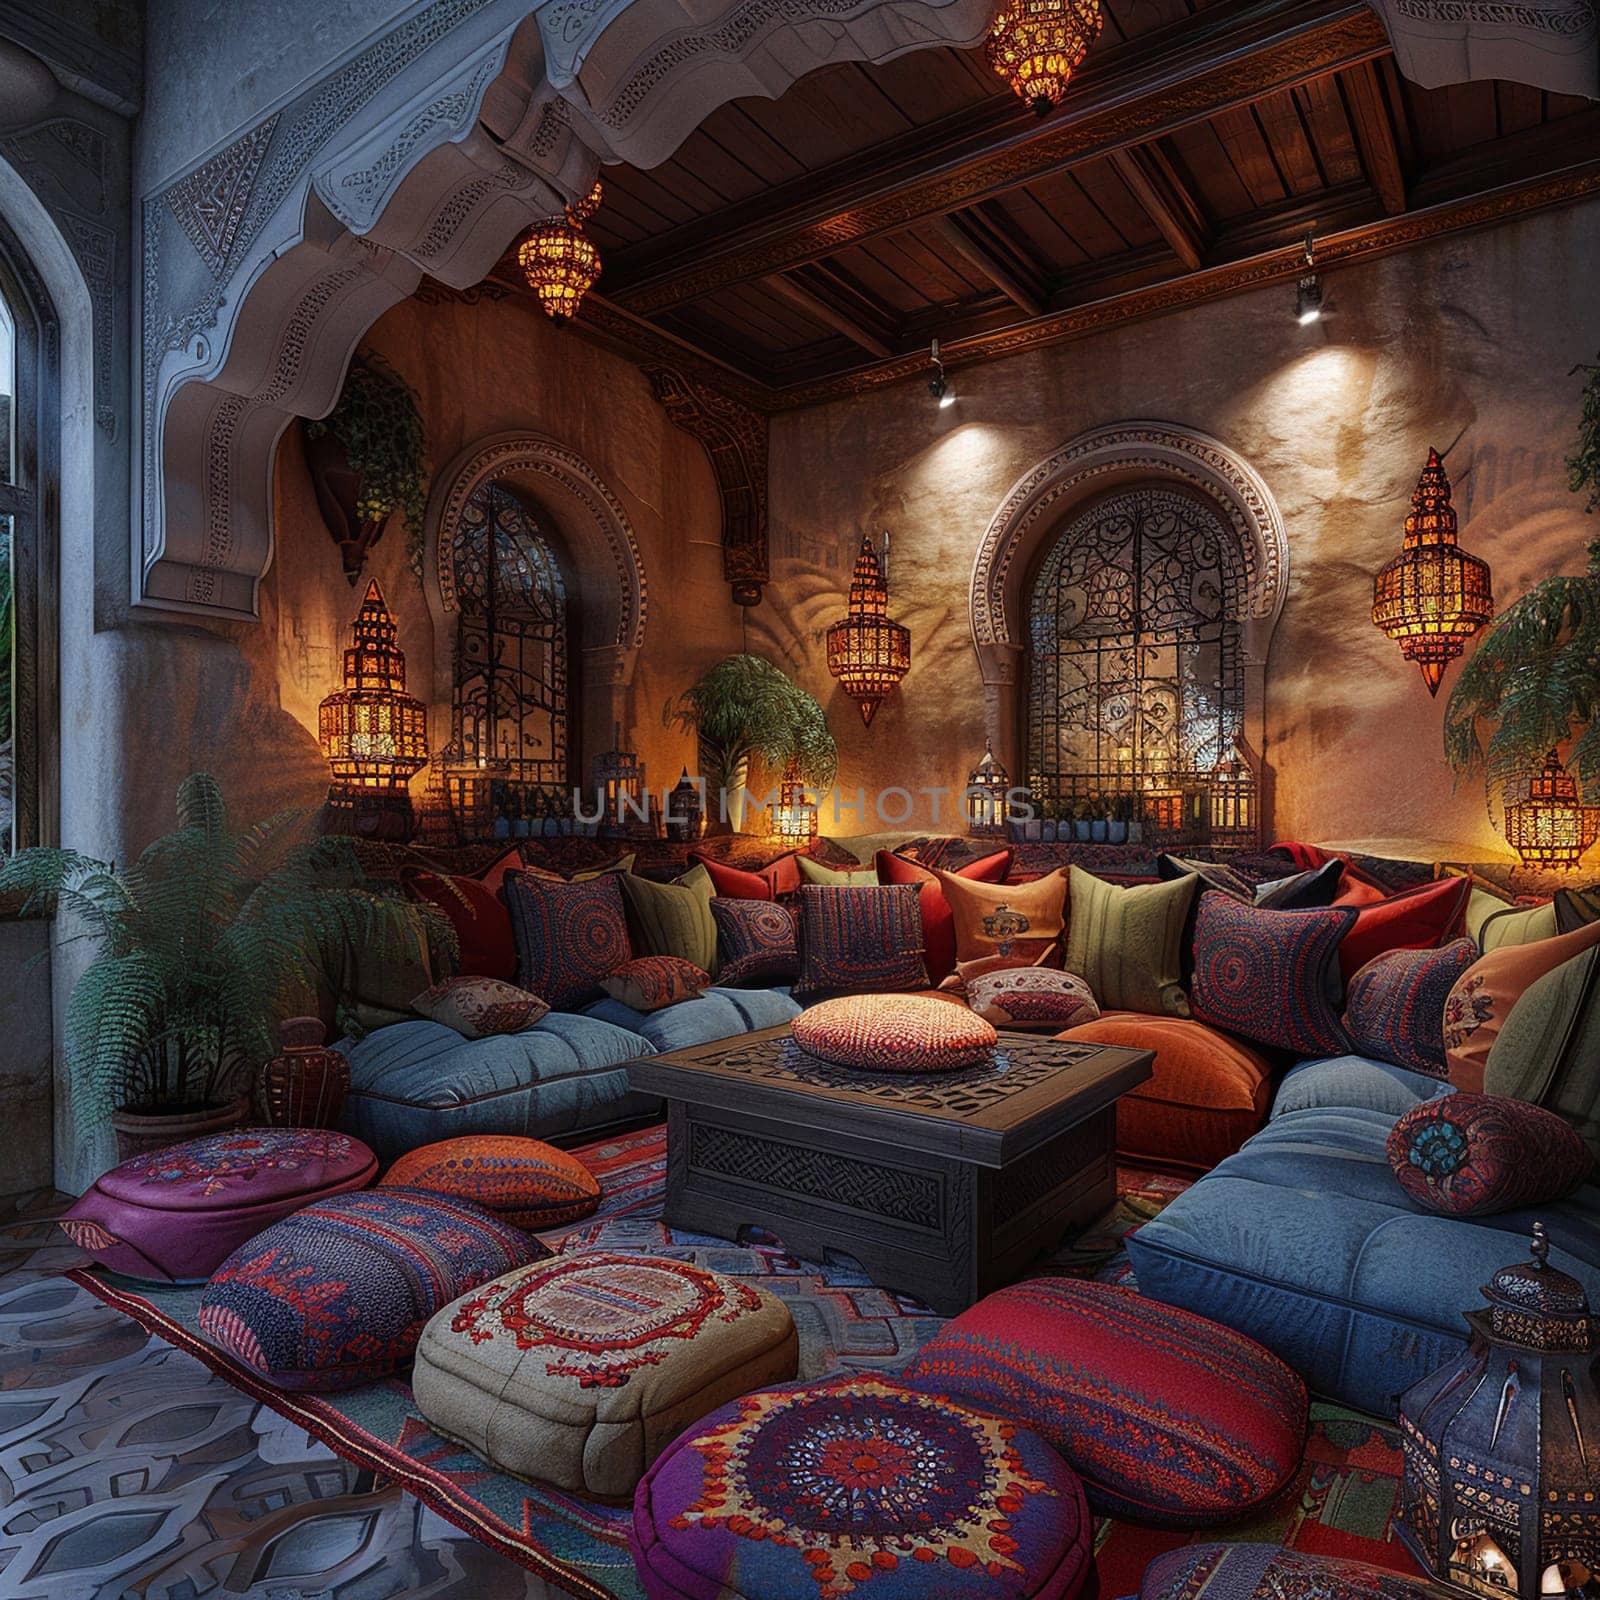 Moroccan-style lounge with rich colors, lanterns, and comfortable low seating